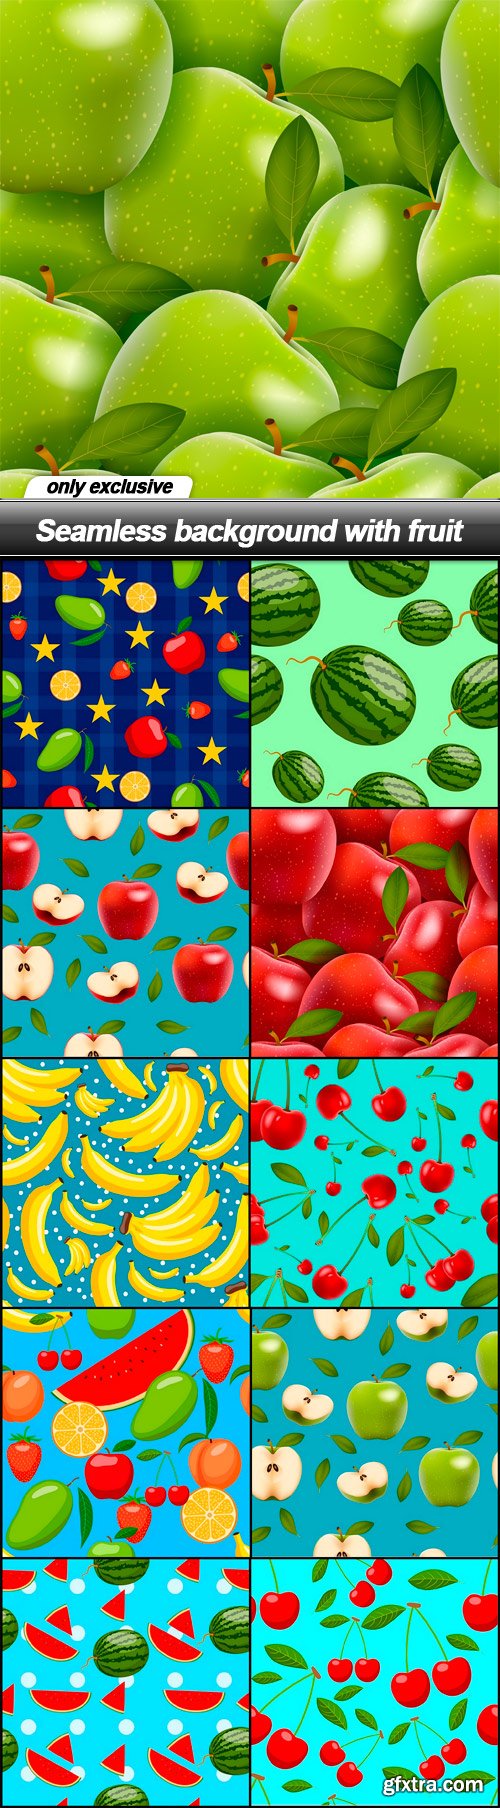 Seamless background with fruit - 11 EPS